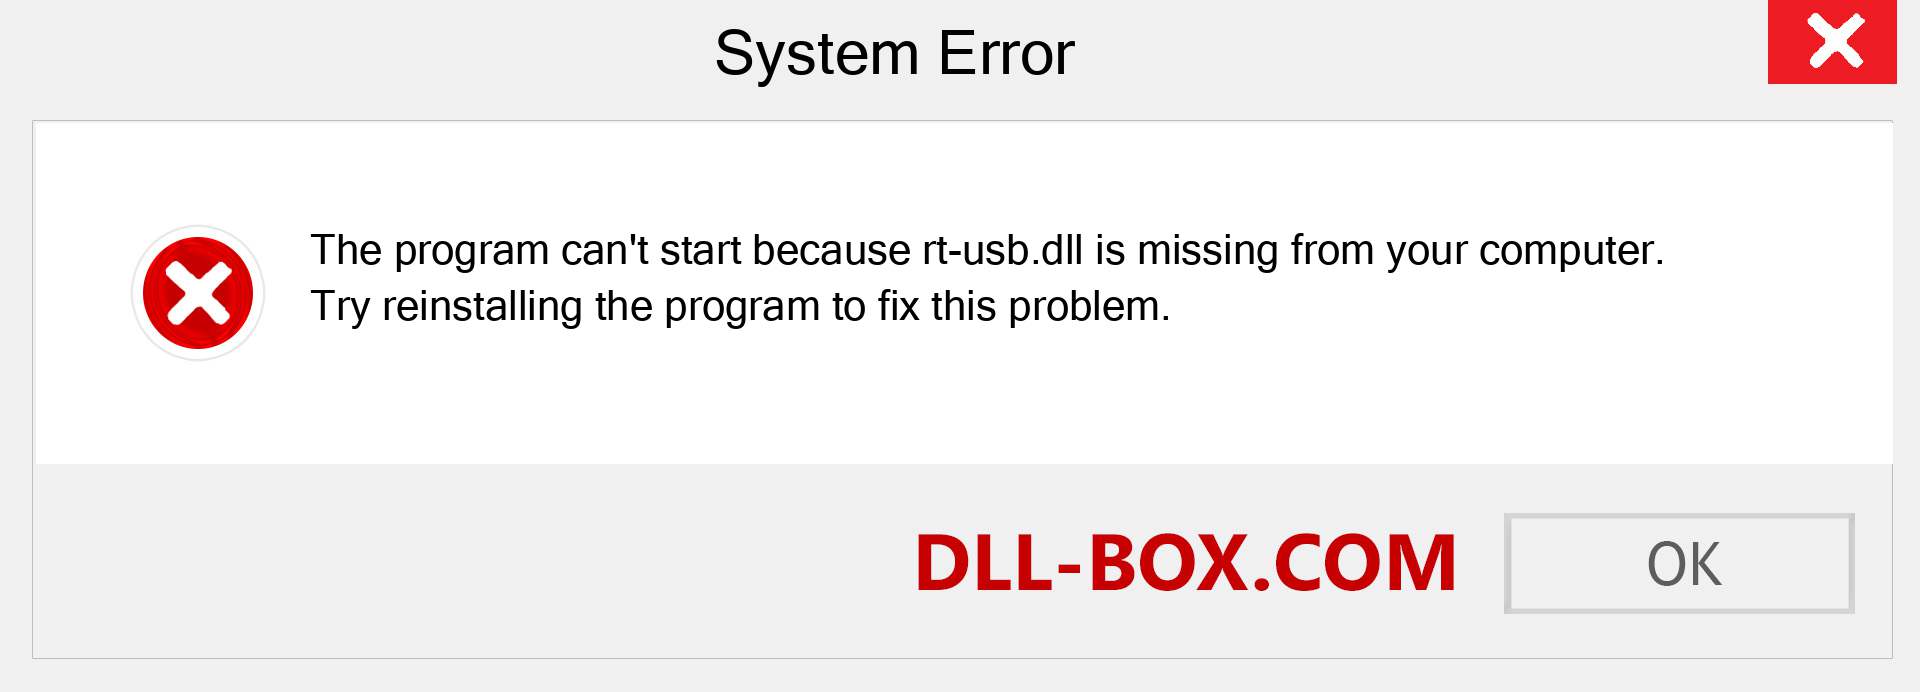  rt-usb.dll file is missing?. Download for Windows 7, 8, 10 - Fix  rt-usb dll Missing Error on Windows, photos, images